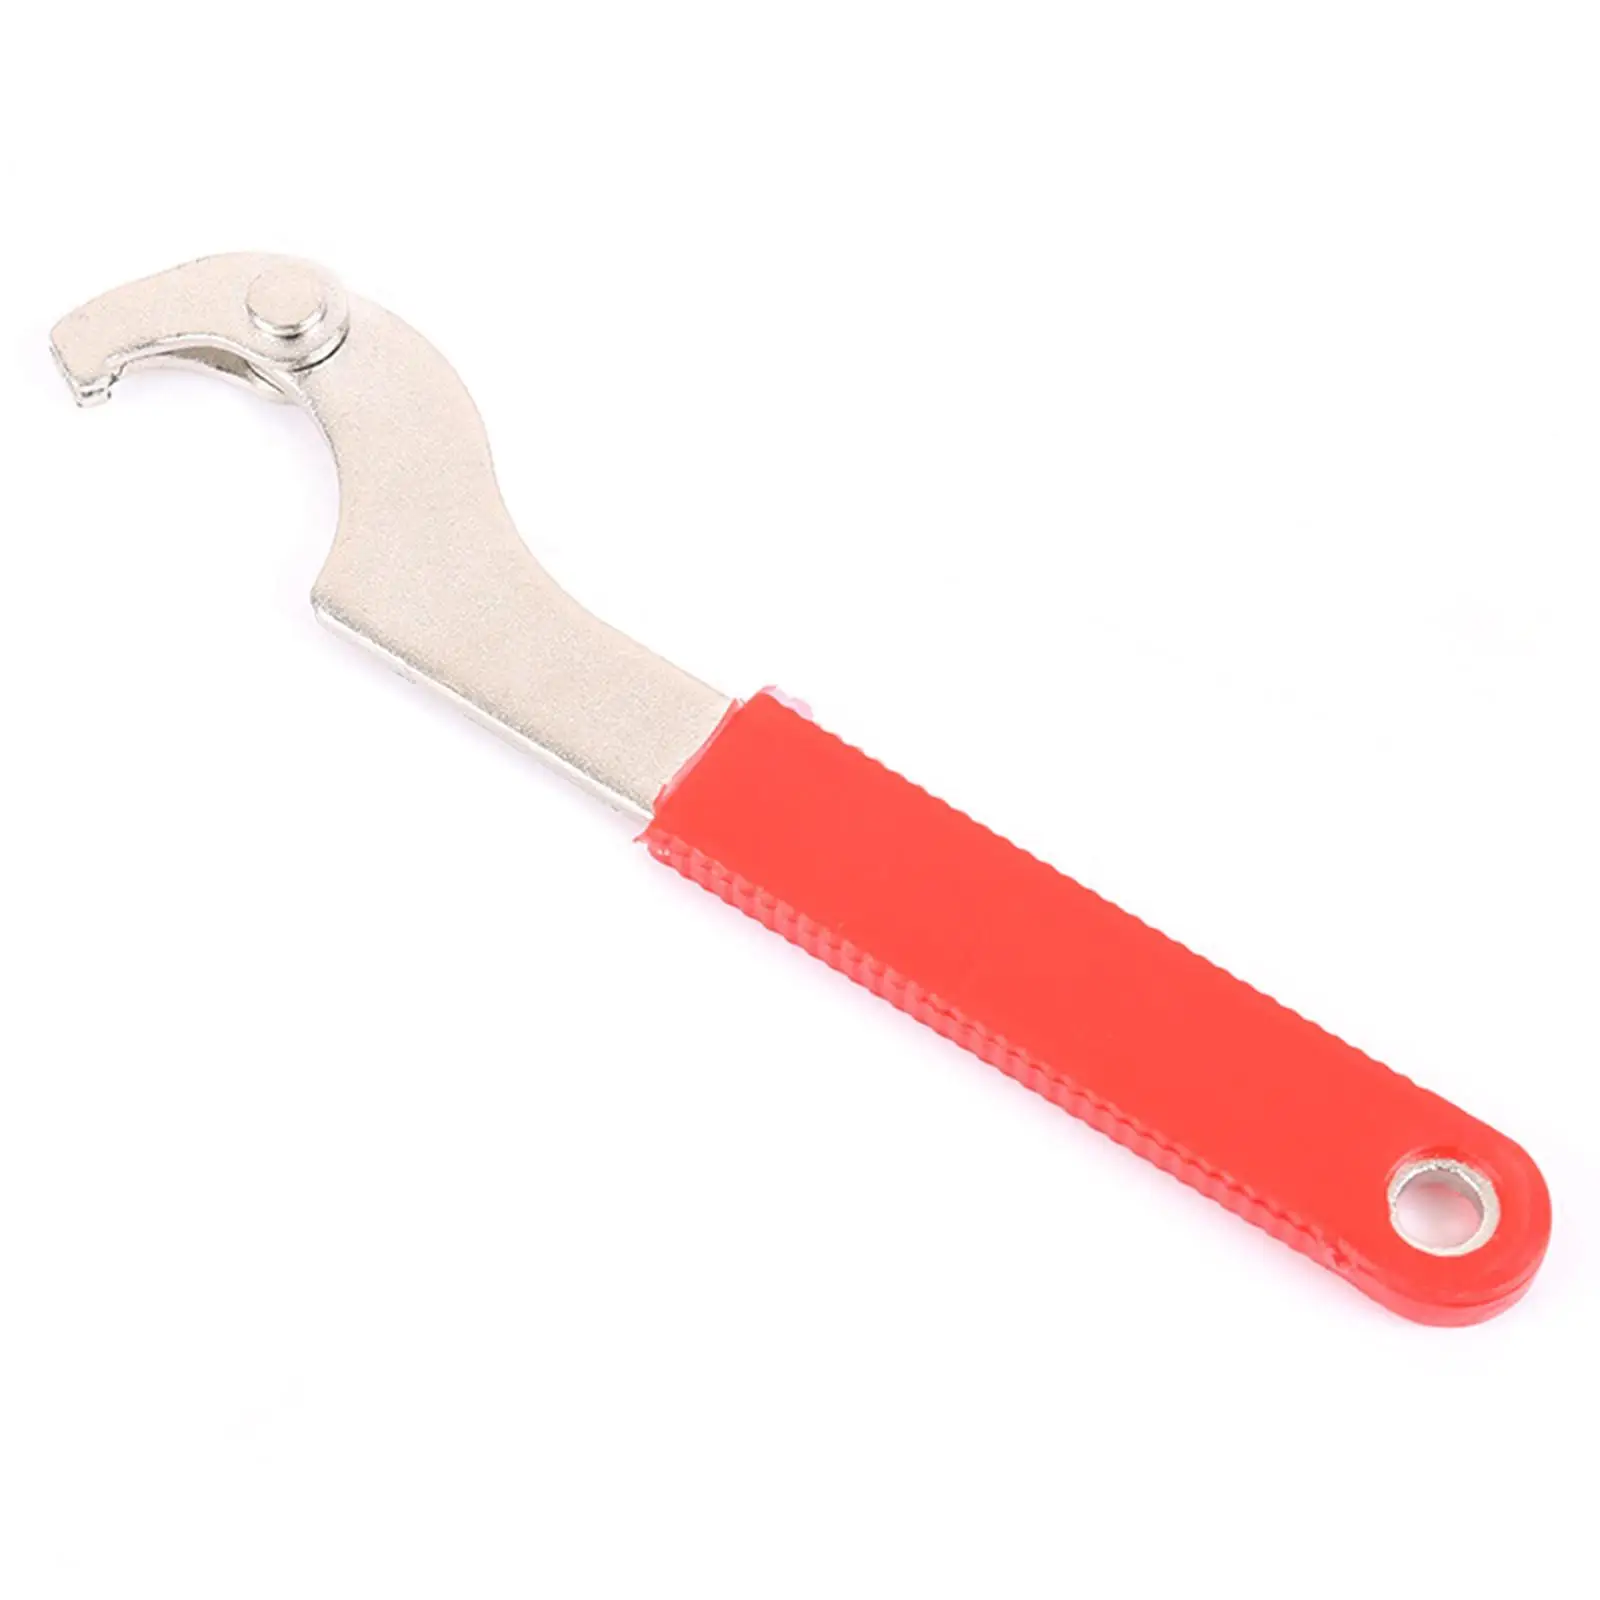 Bicycle Bottom Bracket Tool Comfortable to Grip Old Fashioned Hook Wrench Hook Spanner for Outdoor Mountain Bicycle Motorcycle